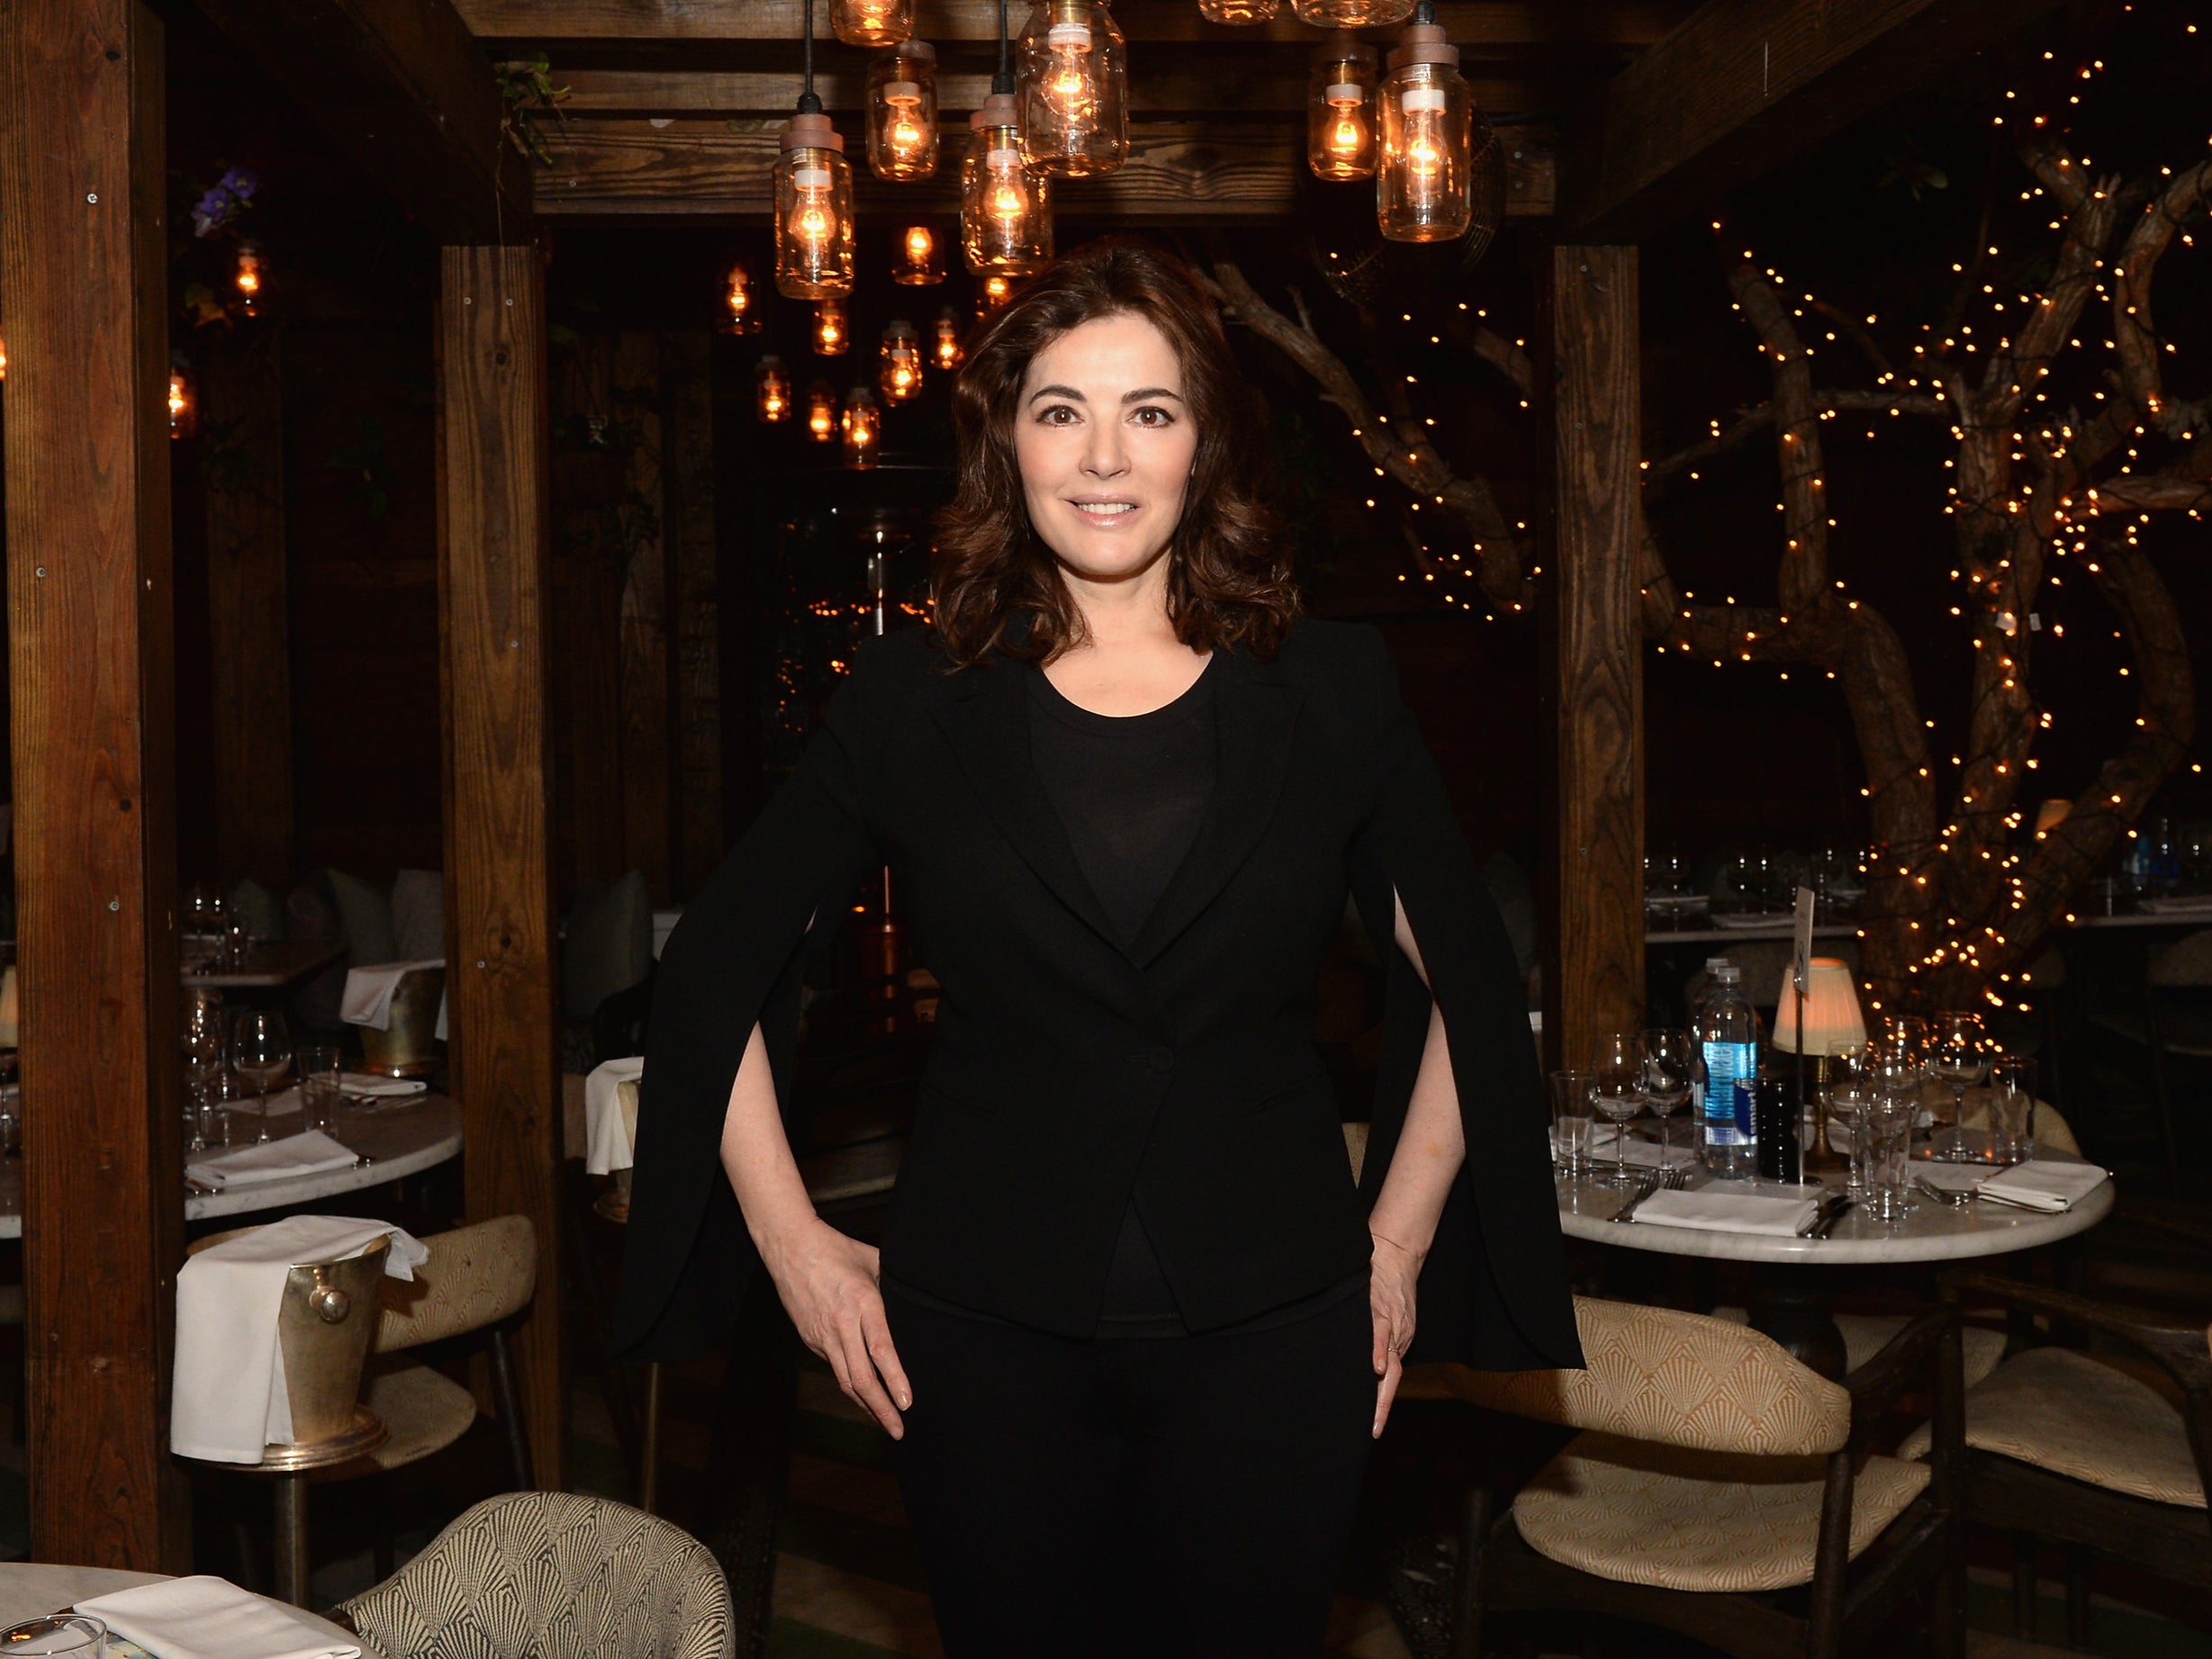 Nigella Lawson attends a Dinner Hosted By Nigella Lawson - Part of The NYT Cooking Dinner Series during 2016 Food Network & Cooking Channel South Beach Wine & Food Festival